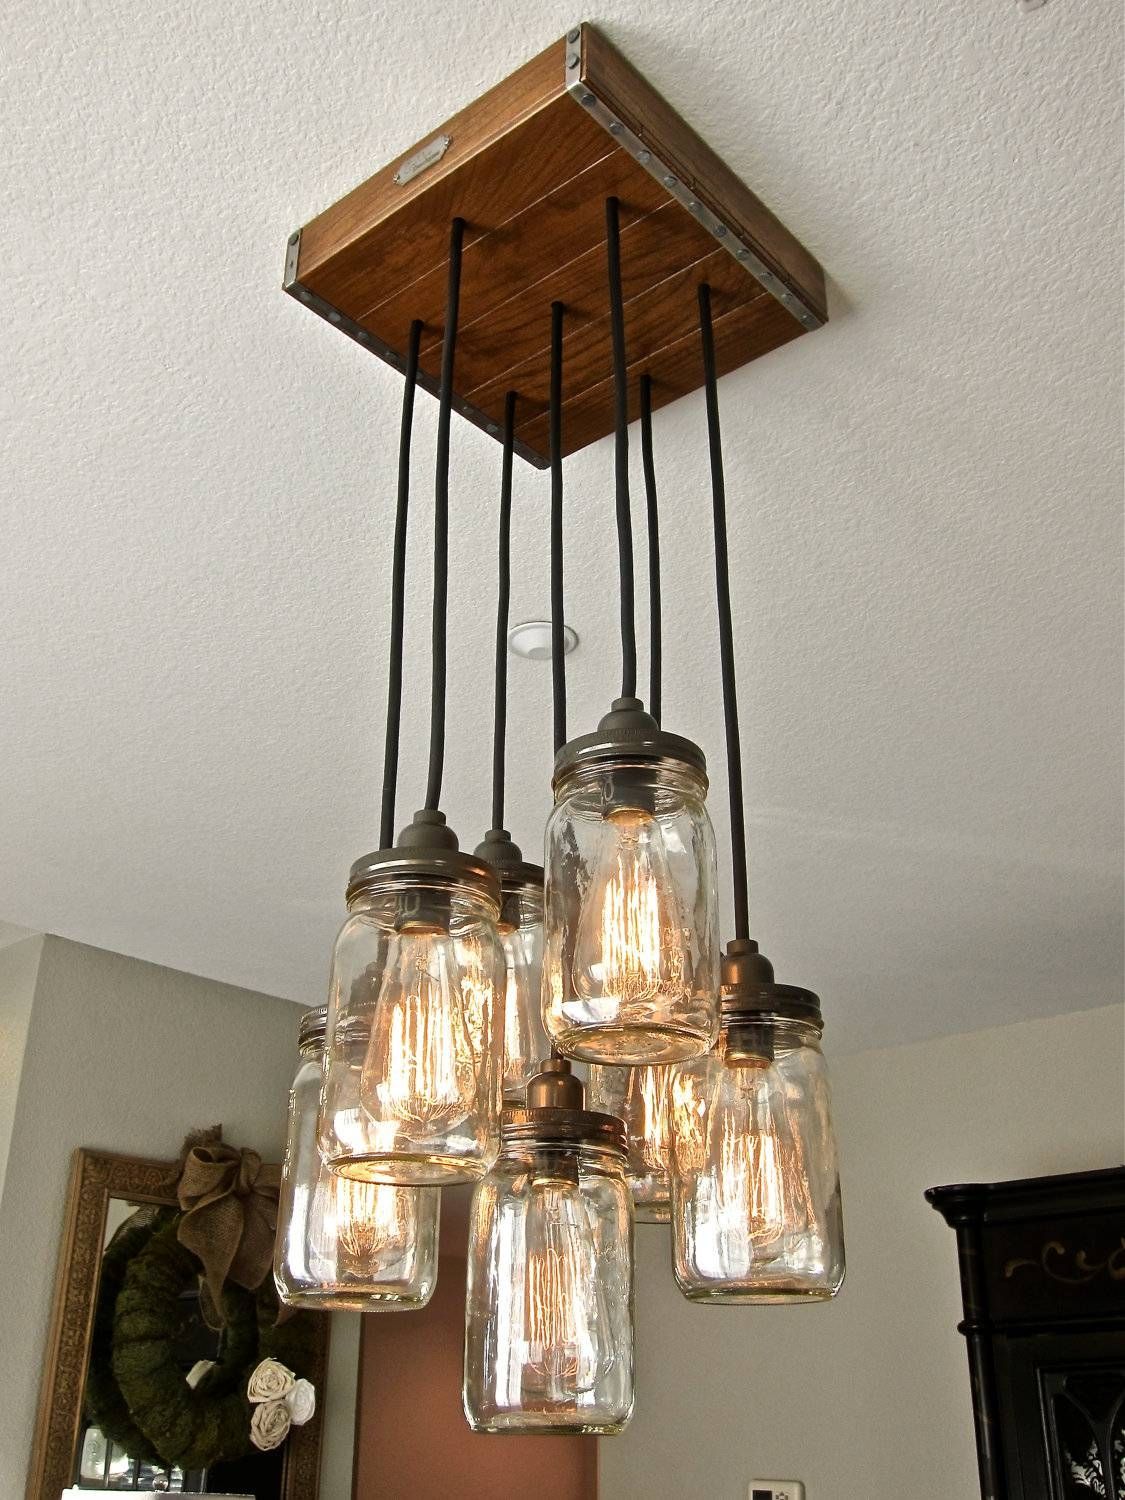 Learn More About Rustic Pendant Lights | Med Art Home Design Posters Throughout Diy Stained Glass Pendant Lights (View 2 of 15)